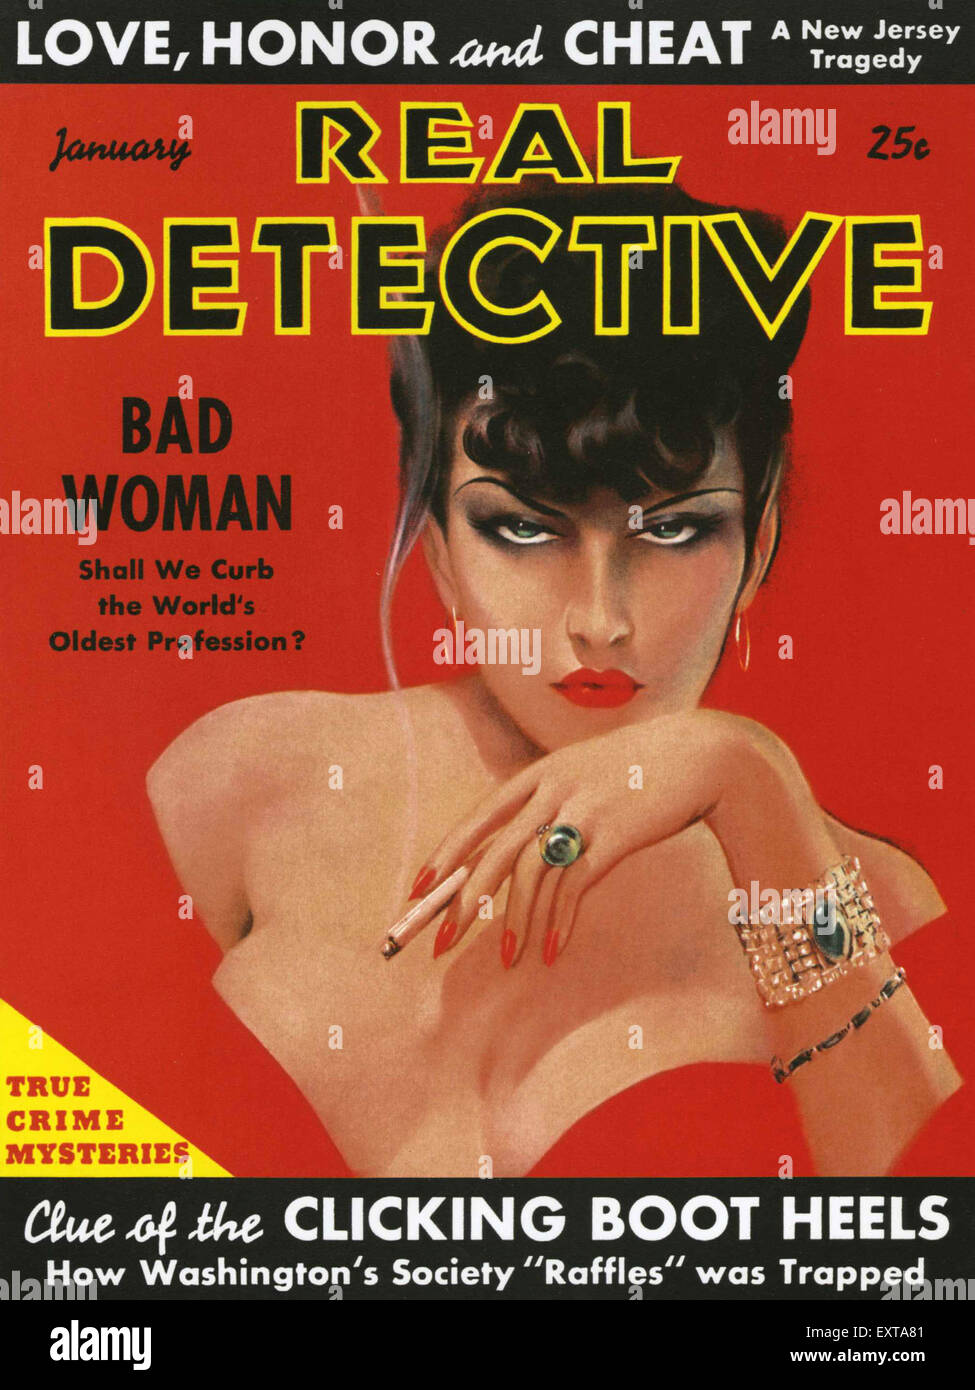 Real Detective Magazine Cover. 